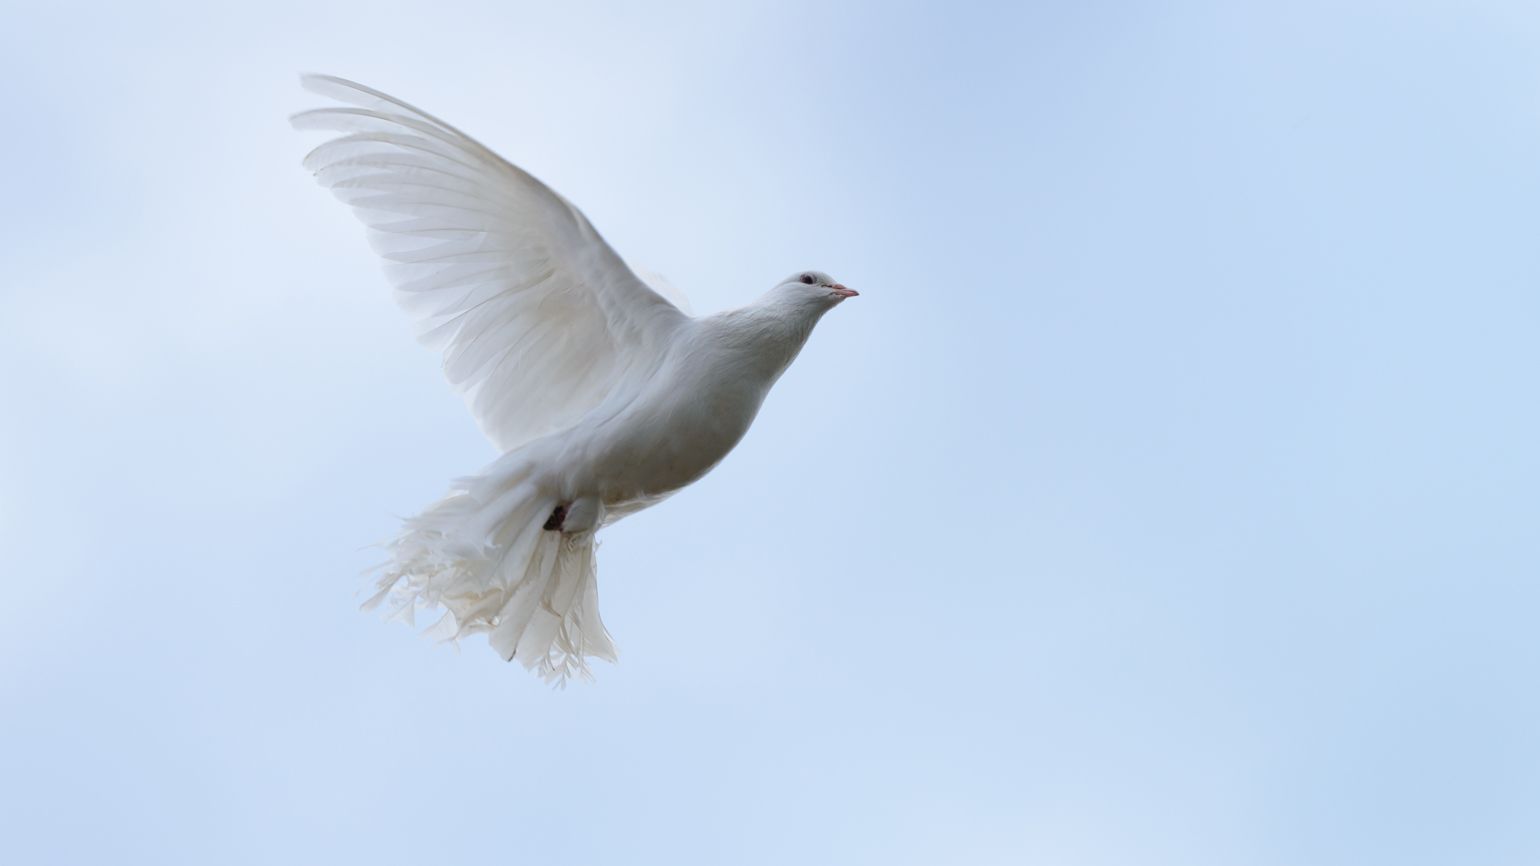 A photo of a dove in mid flight.